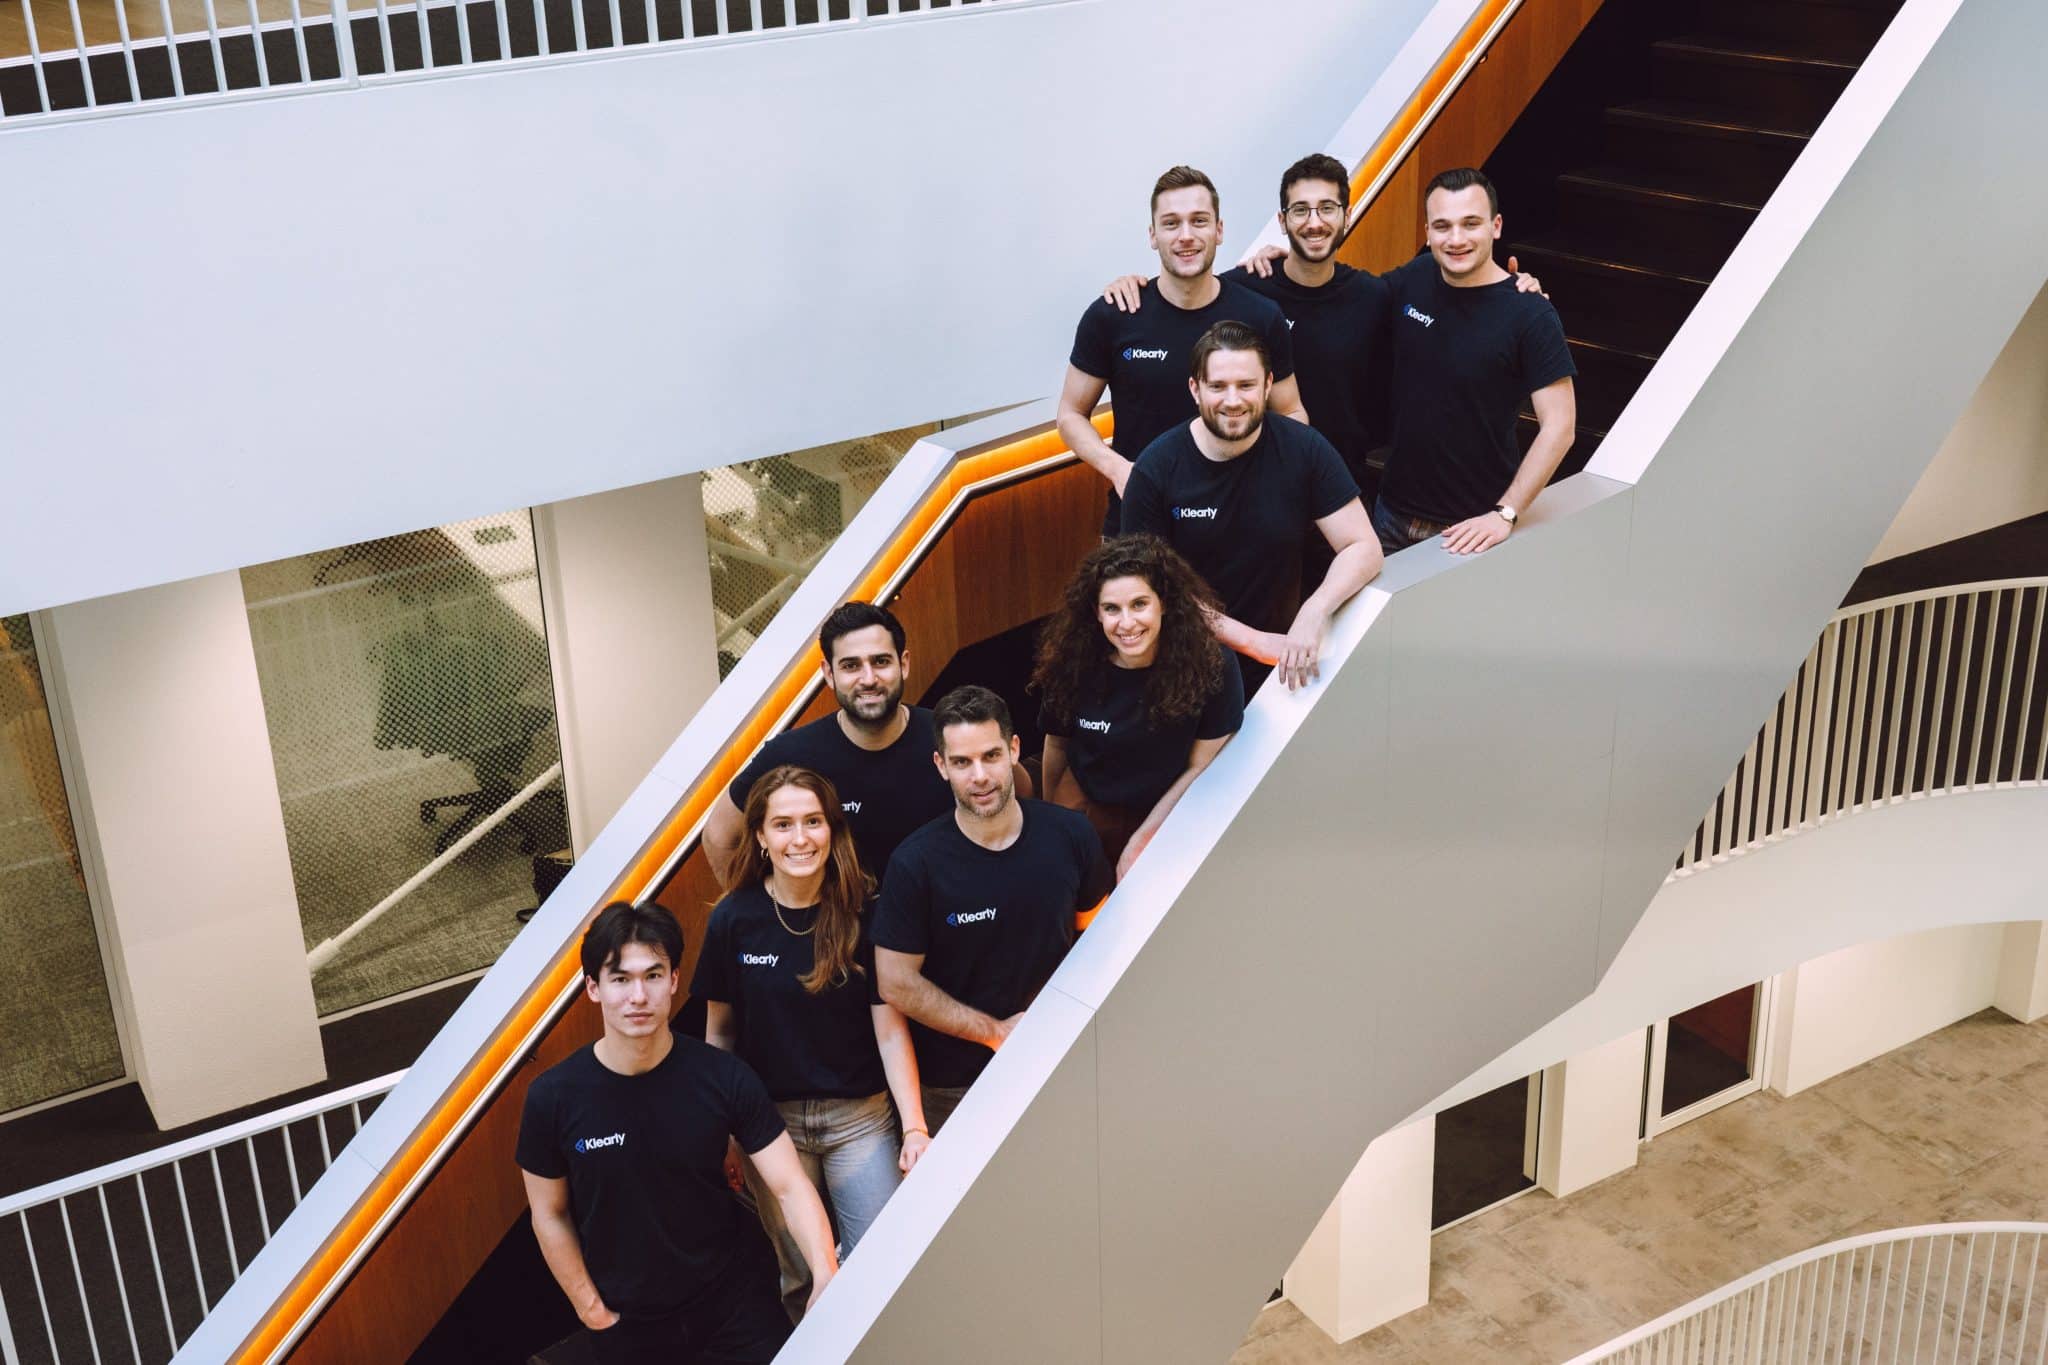 Amsterdam-based Klearly raises €2.1 million to officially launch its phone-native payments app